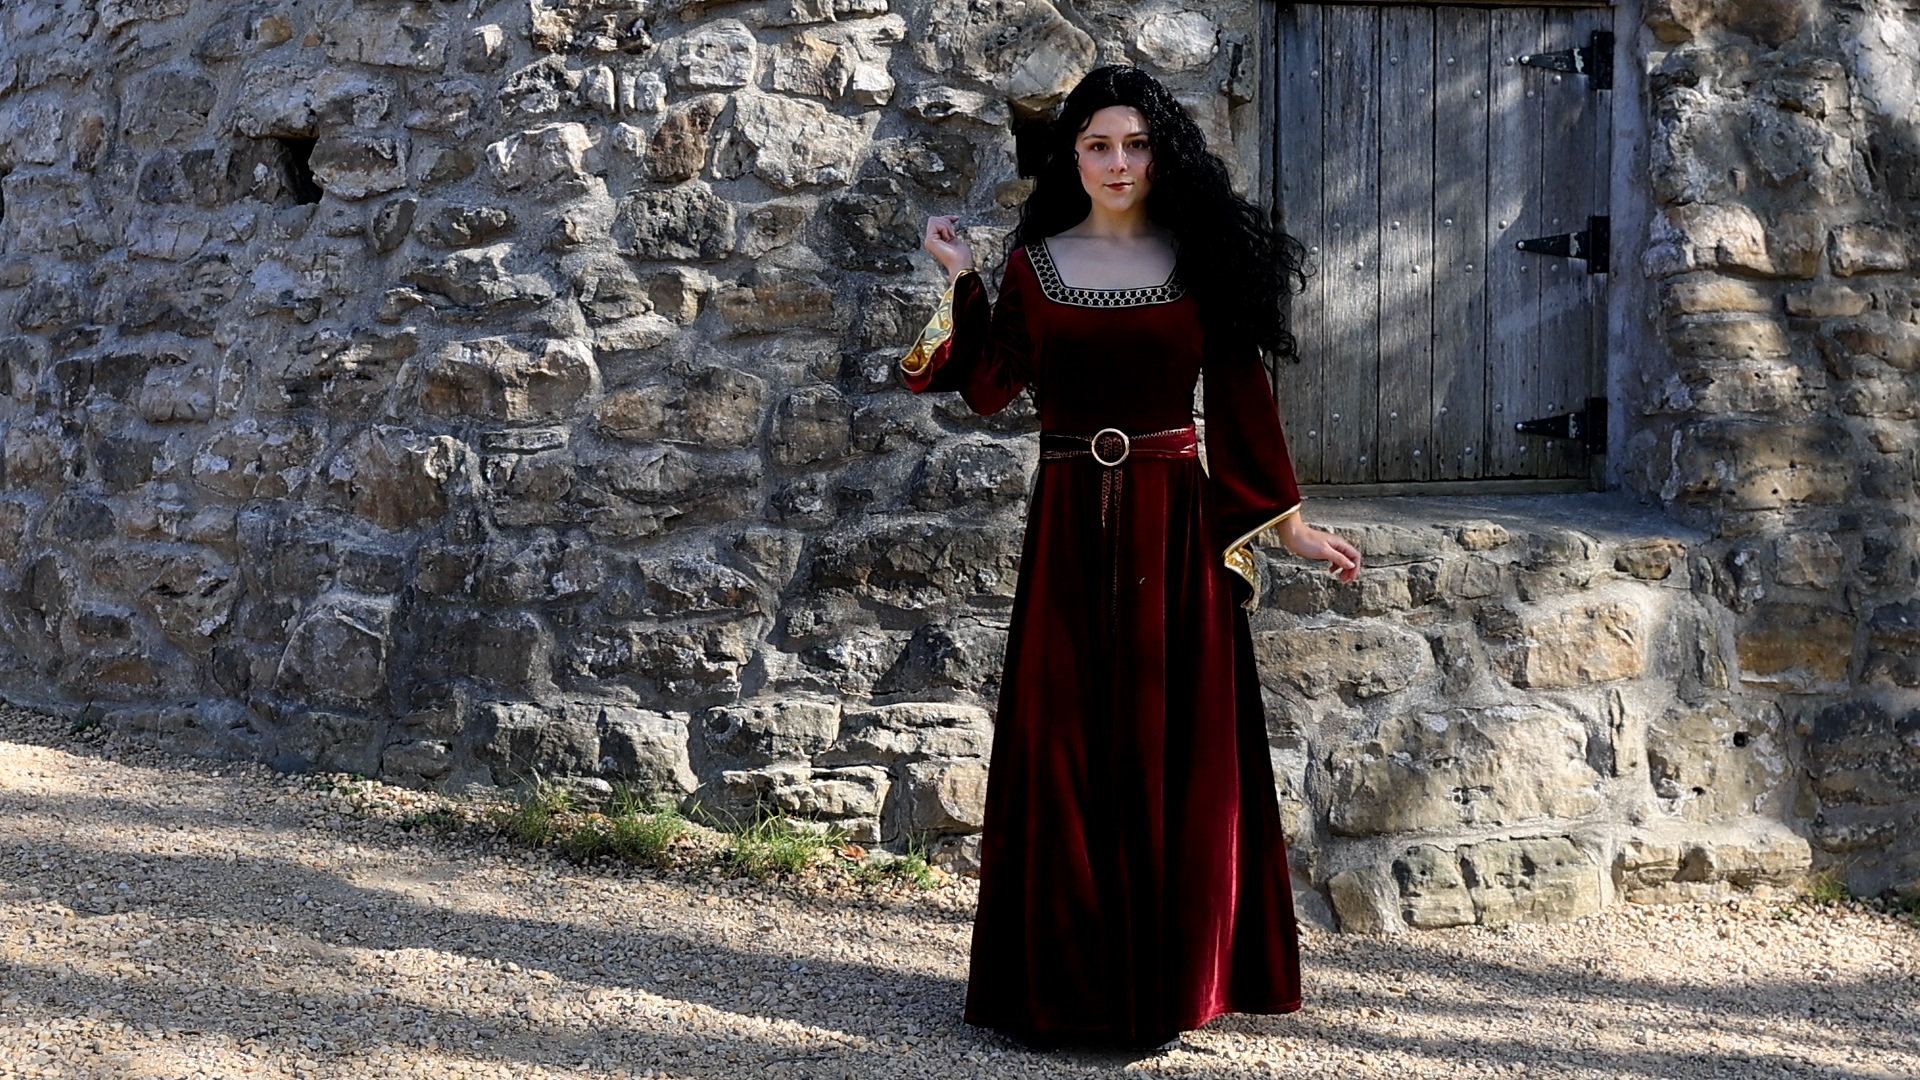 Mother Gothel Costume for Women from Disney's Tangled